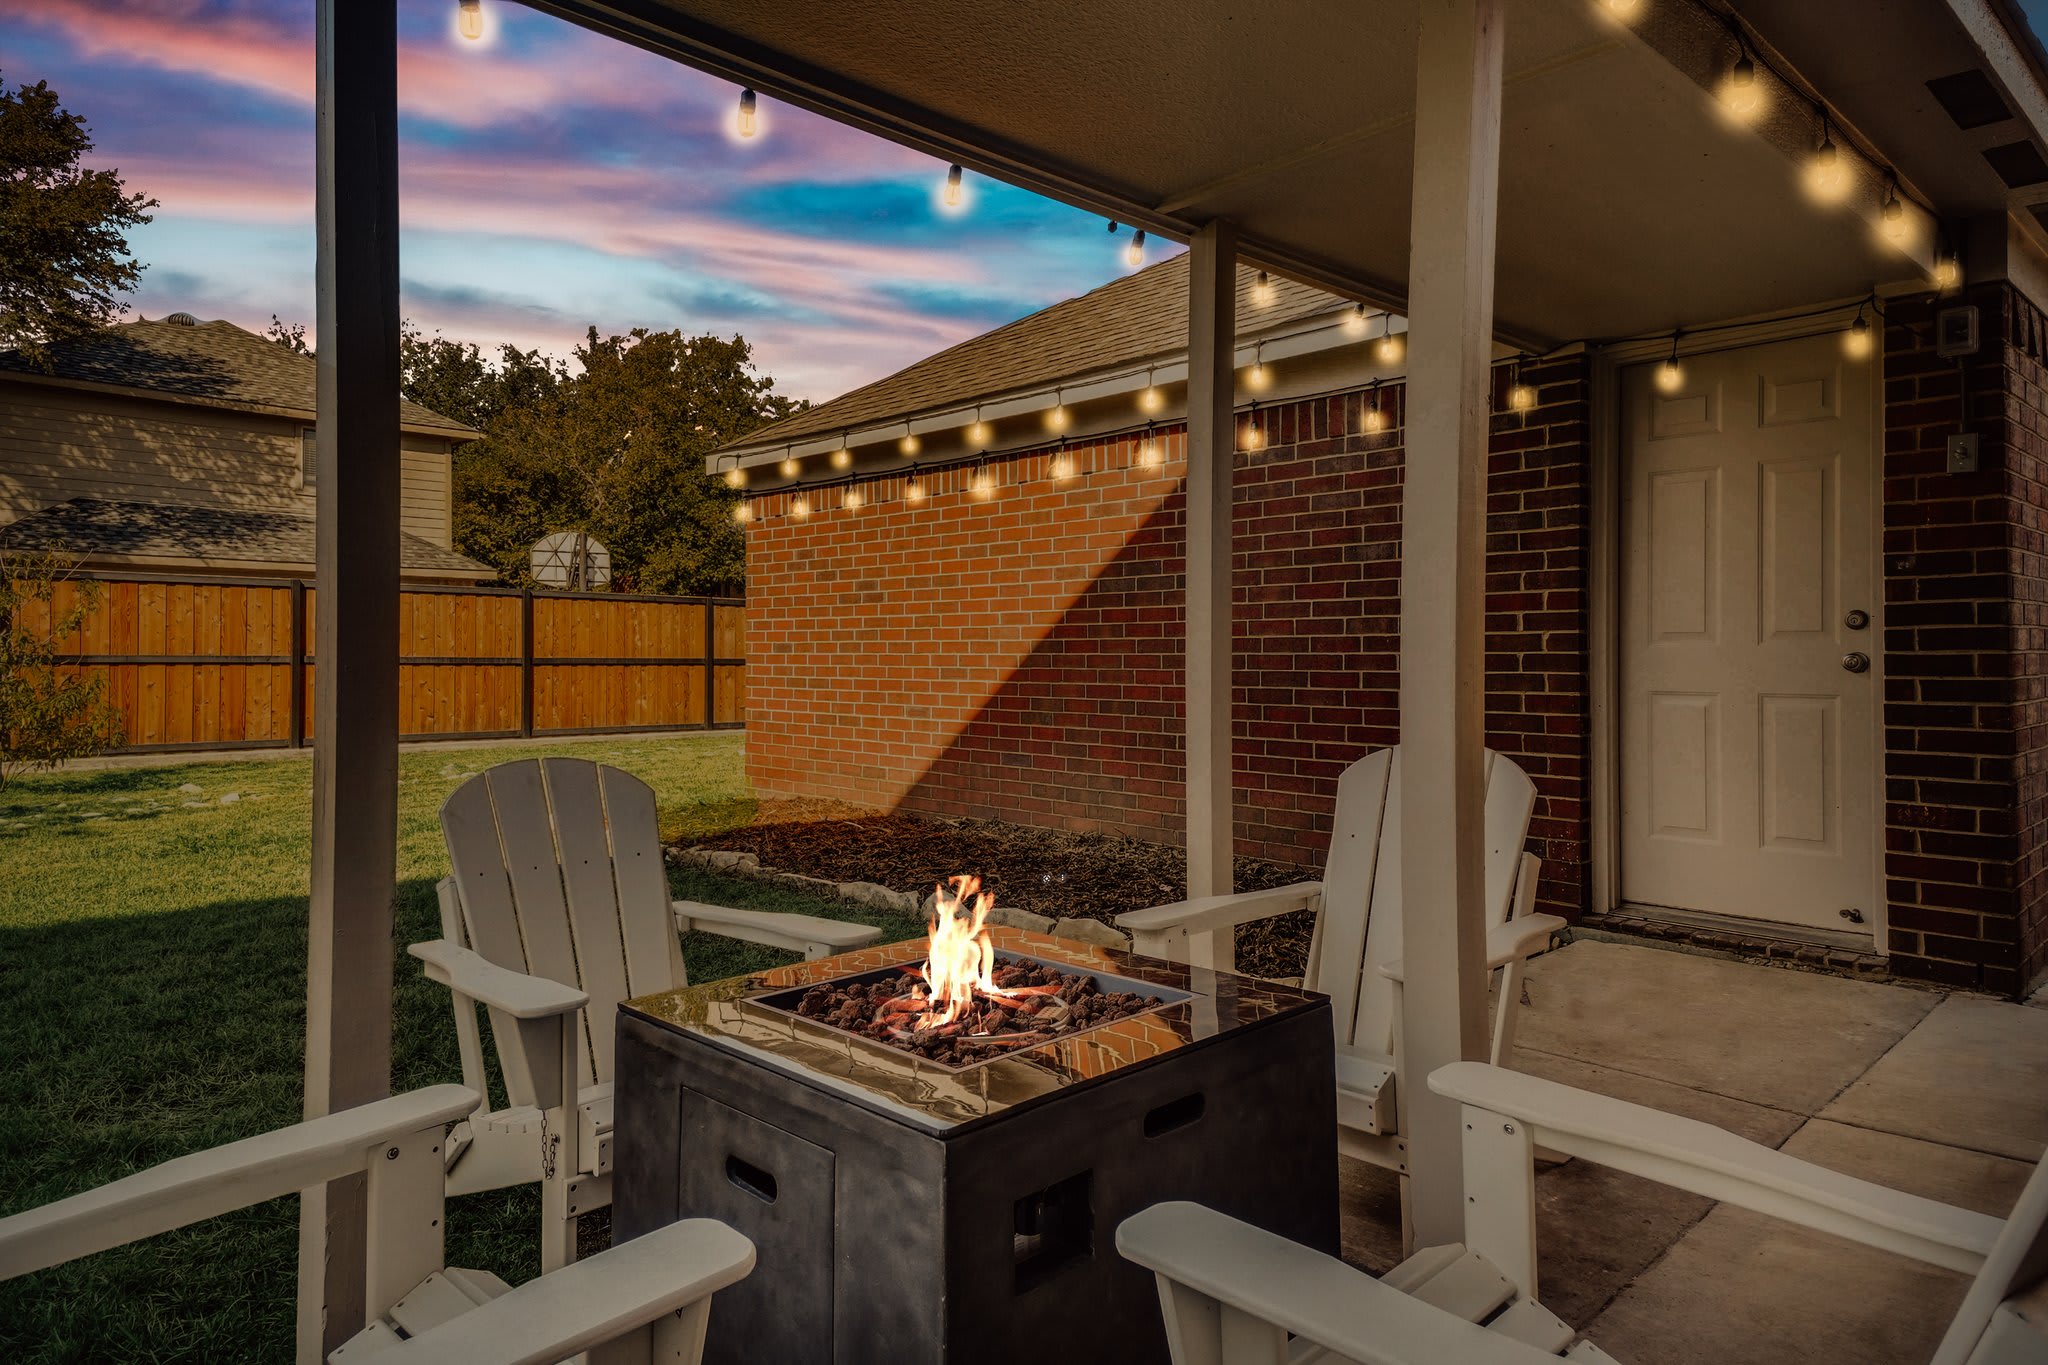 You can stay warm and toasty around the fire pit as you chat late into the evening. Maybe you’ll even be able to spot a few constellations!